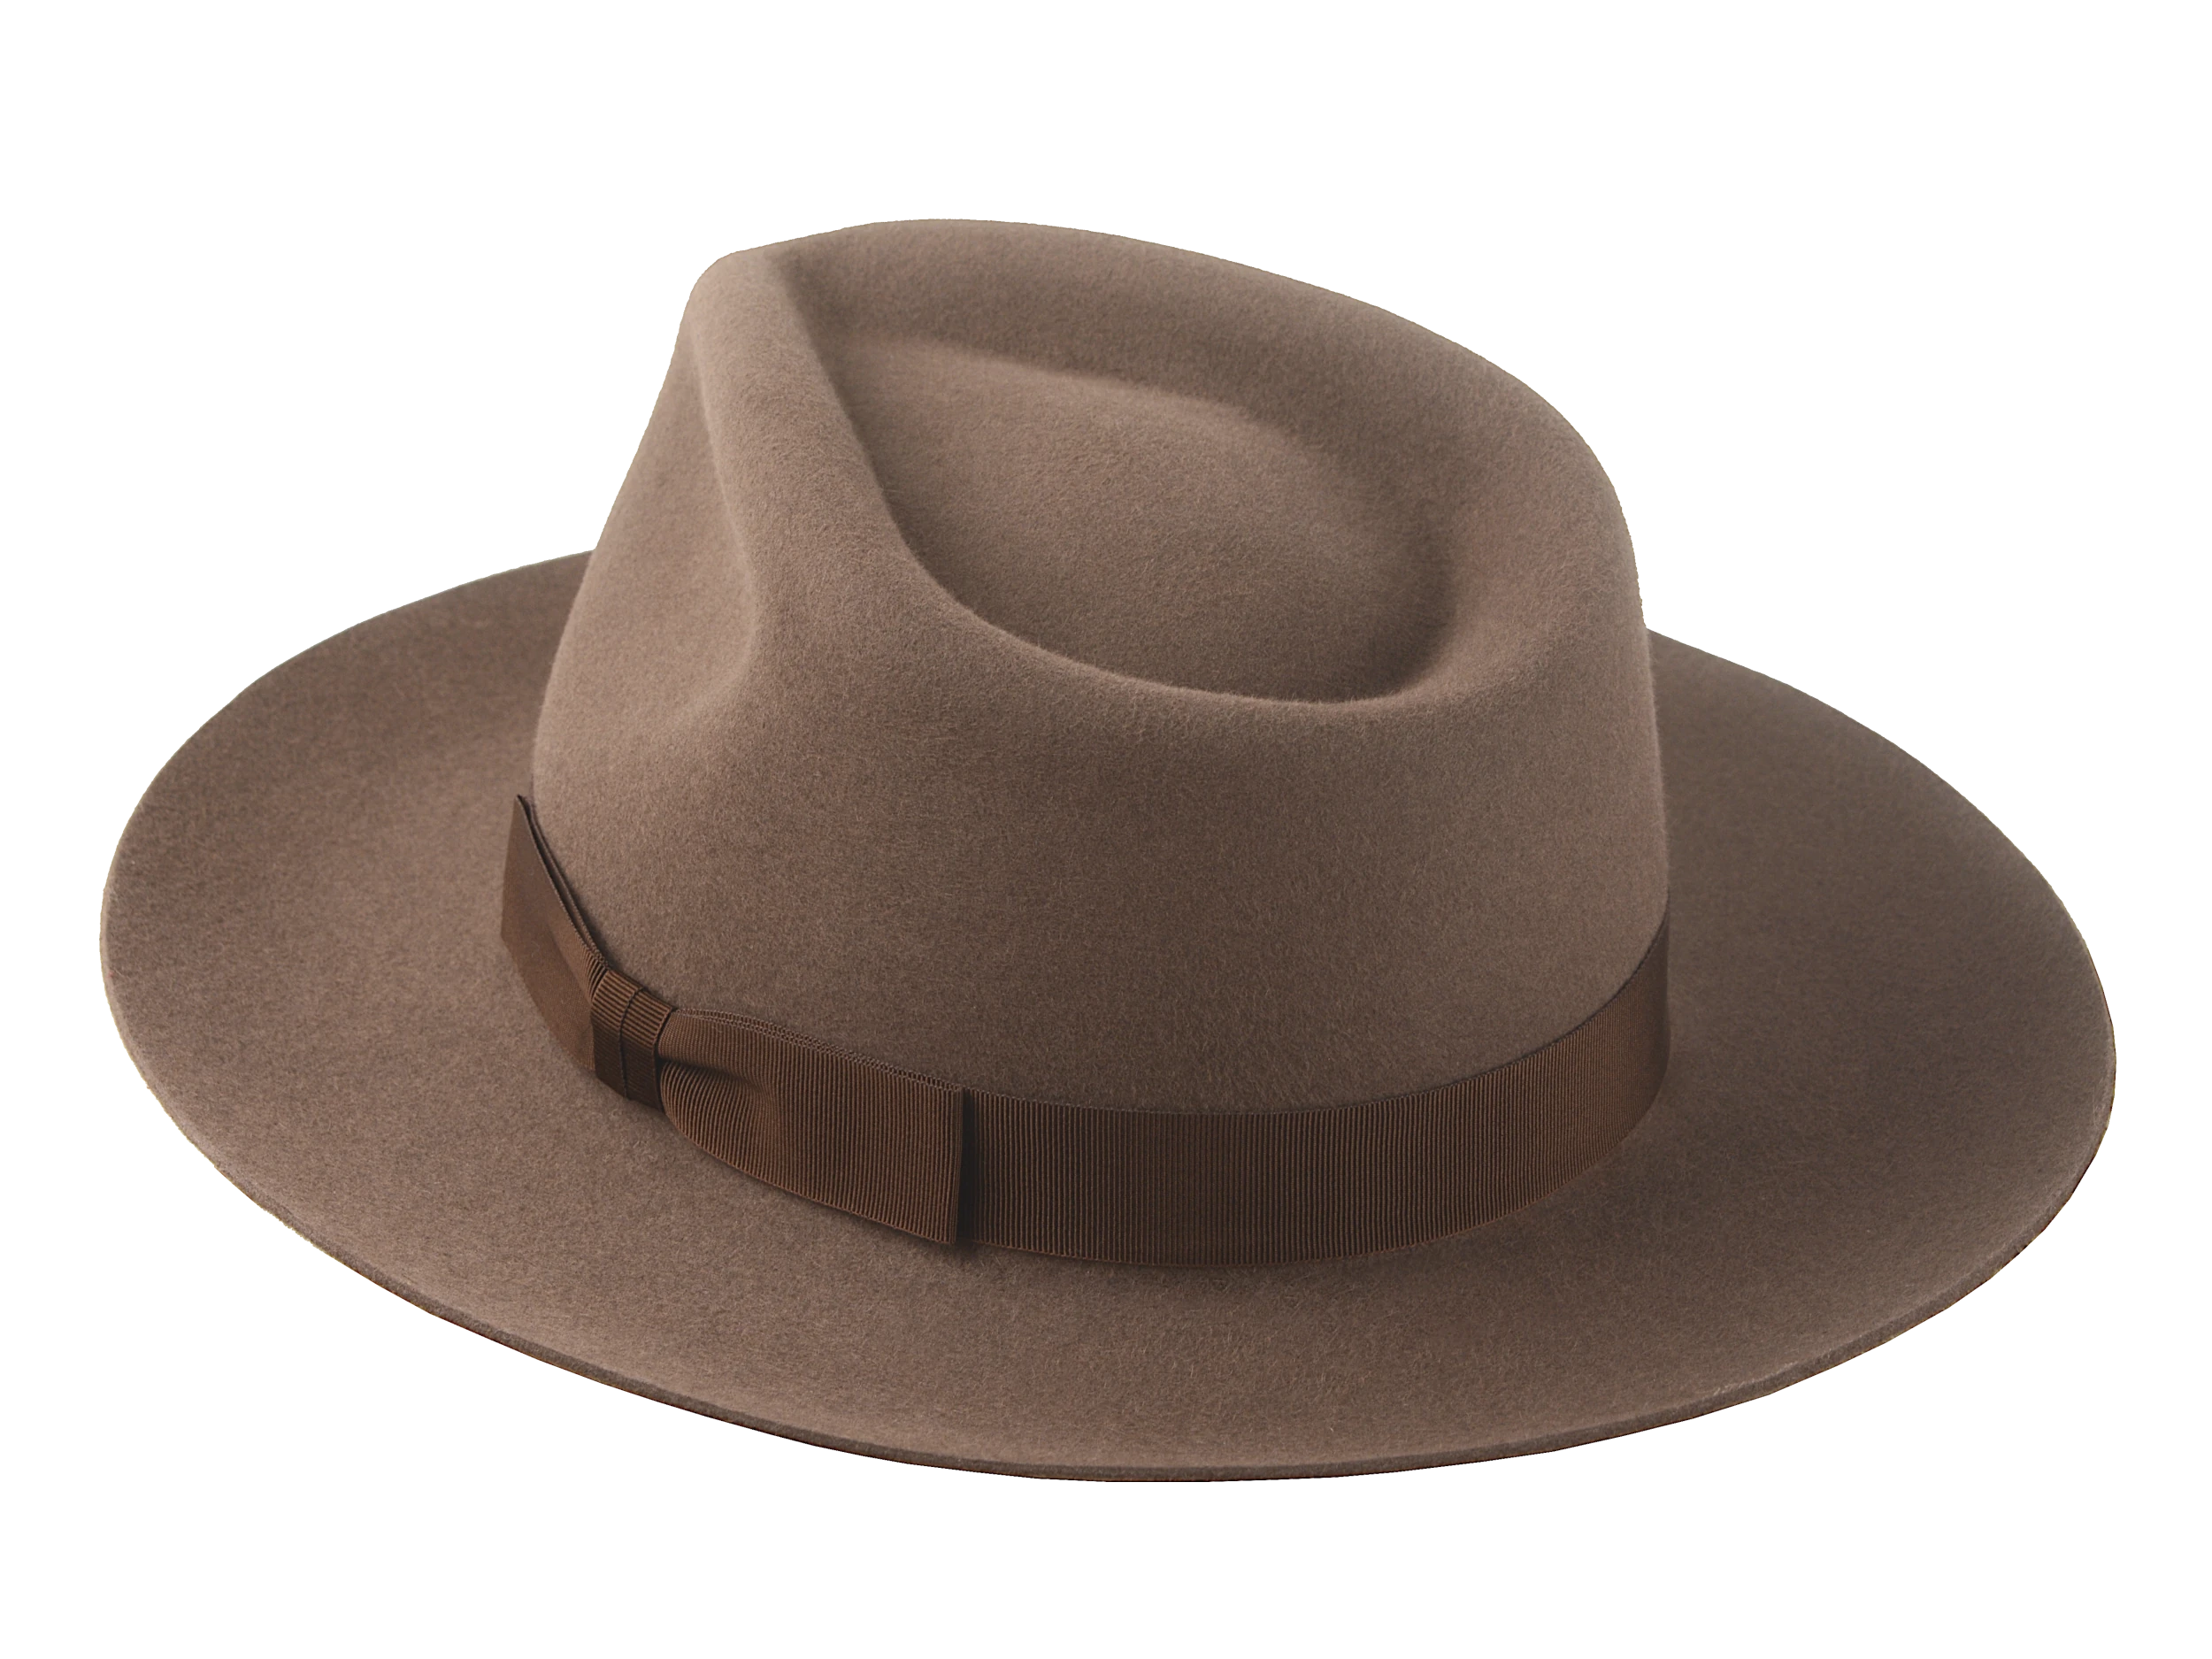 The Pathfinder: Close-up of the teardrop crown and desert taupe felt | Agnoulita Hats